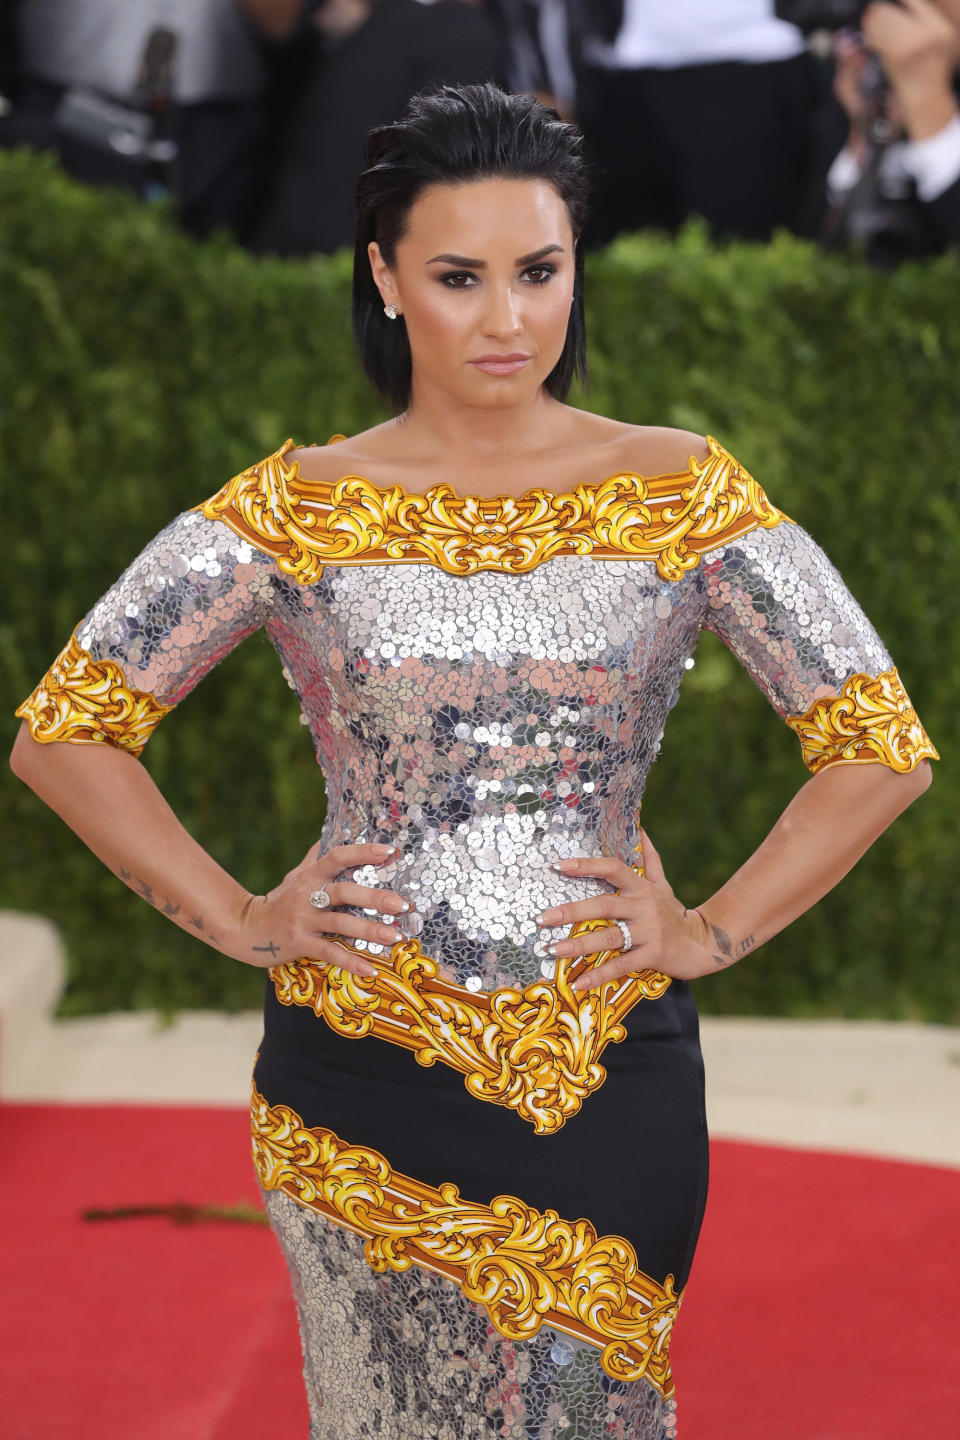 Demi Lovato attends the 2016 'Manus x Machina: Fashion In An Age Of Technology' Costume Institute Gala in New York City.